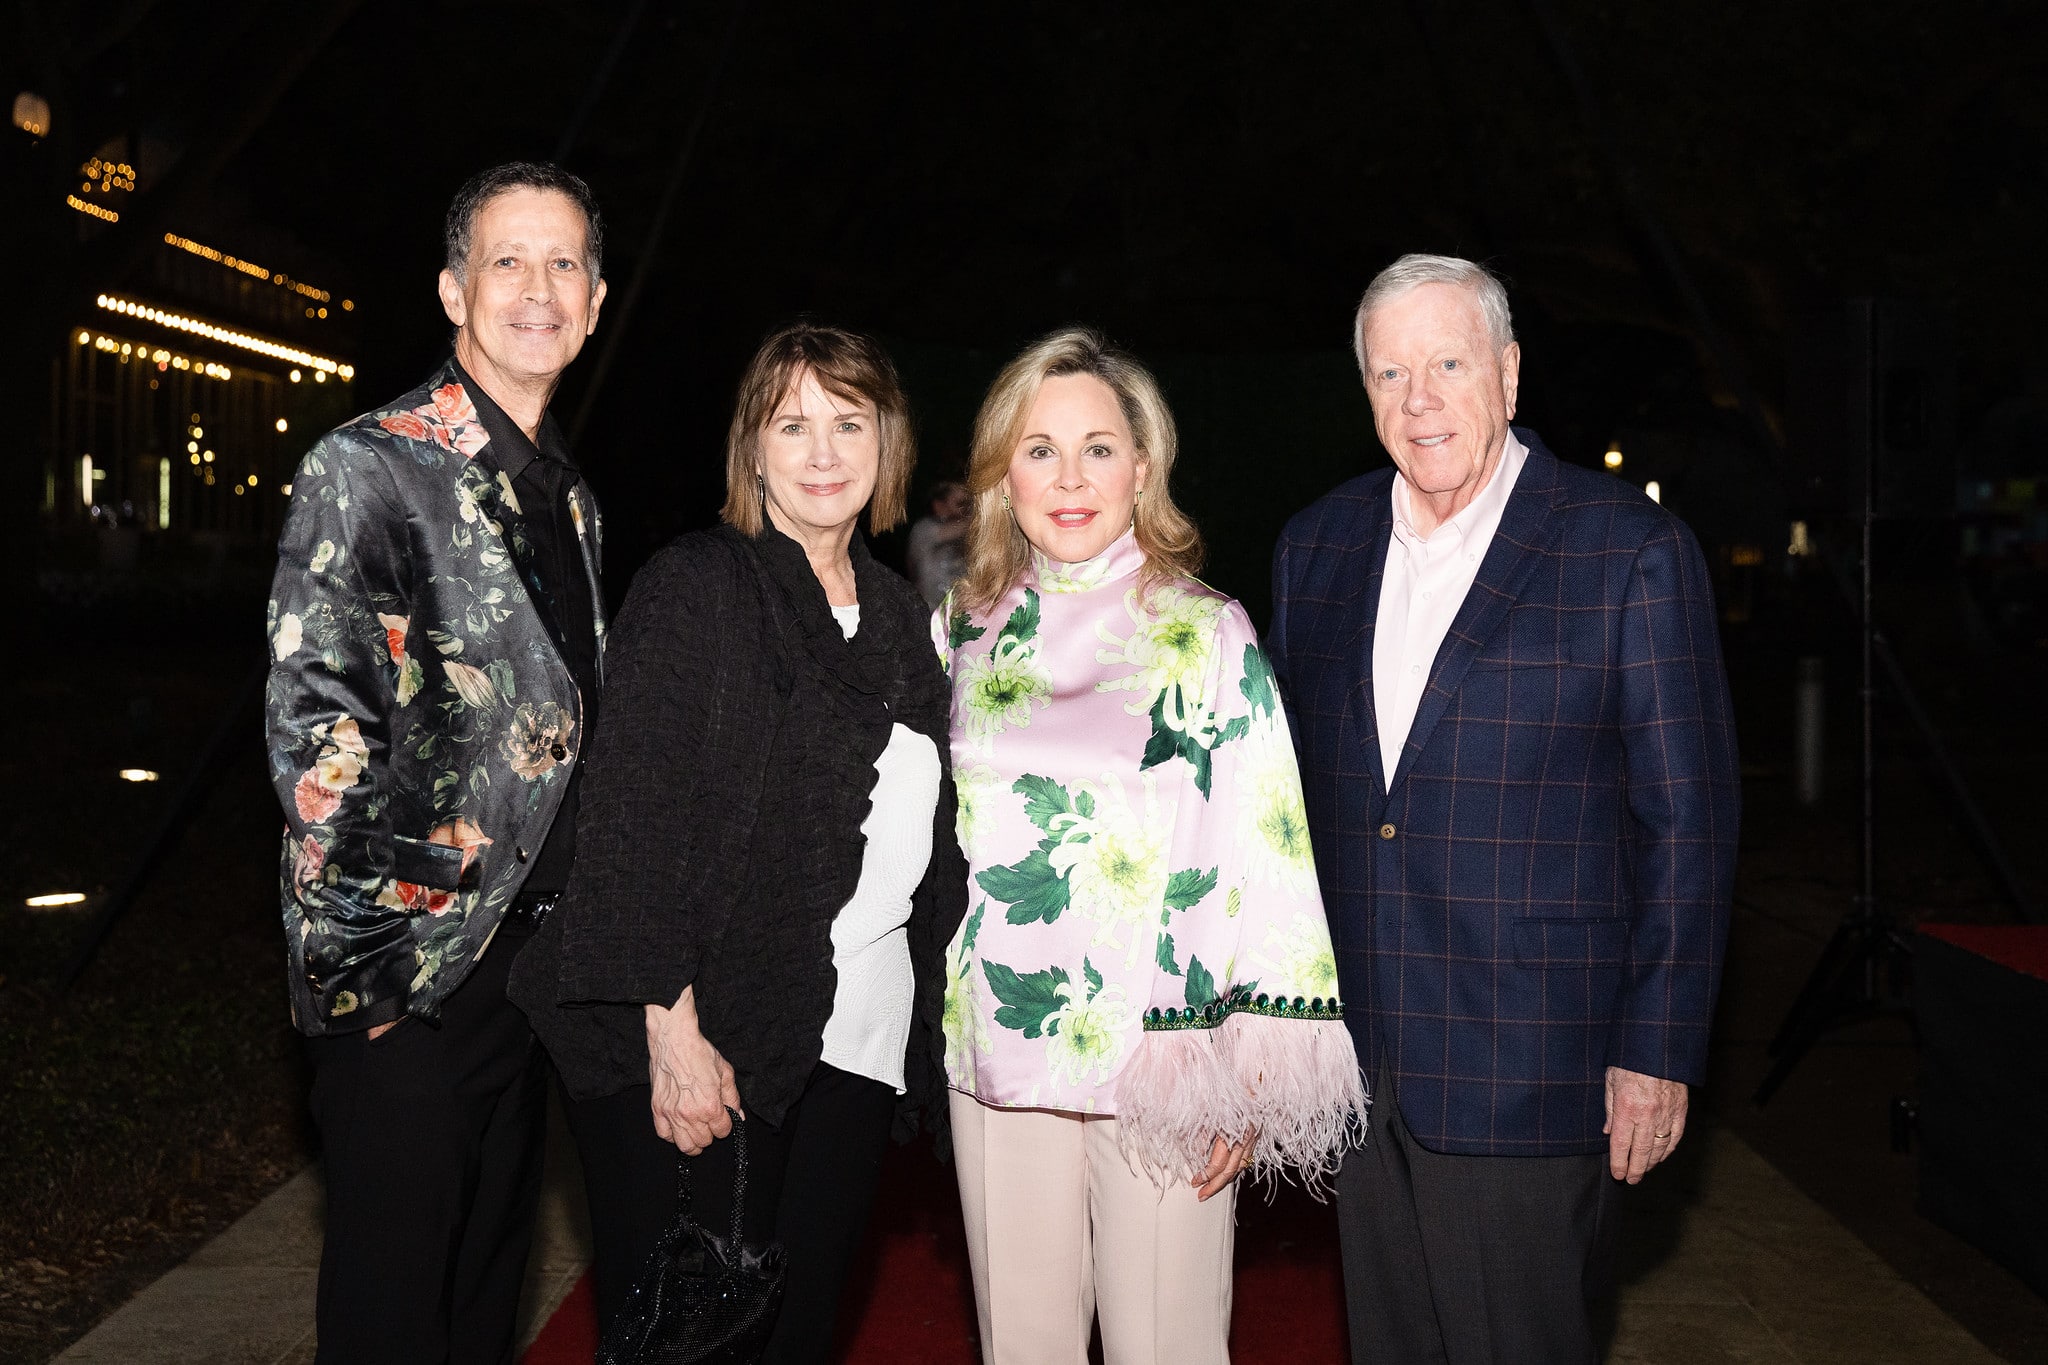 From L-R: Barry Mandel, Susanne Theis, Nancy Kinder, Rich Kinder  Gala on the Green® at Discovery Green in downtown Houston. February 23, 2023. Photo: Lawrence Elizabeth Knox